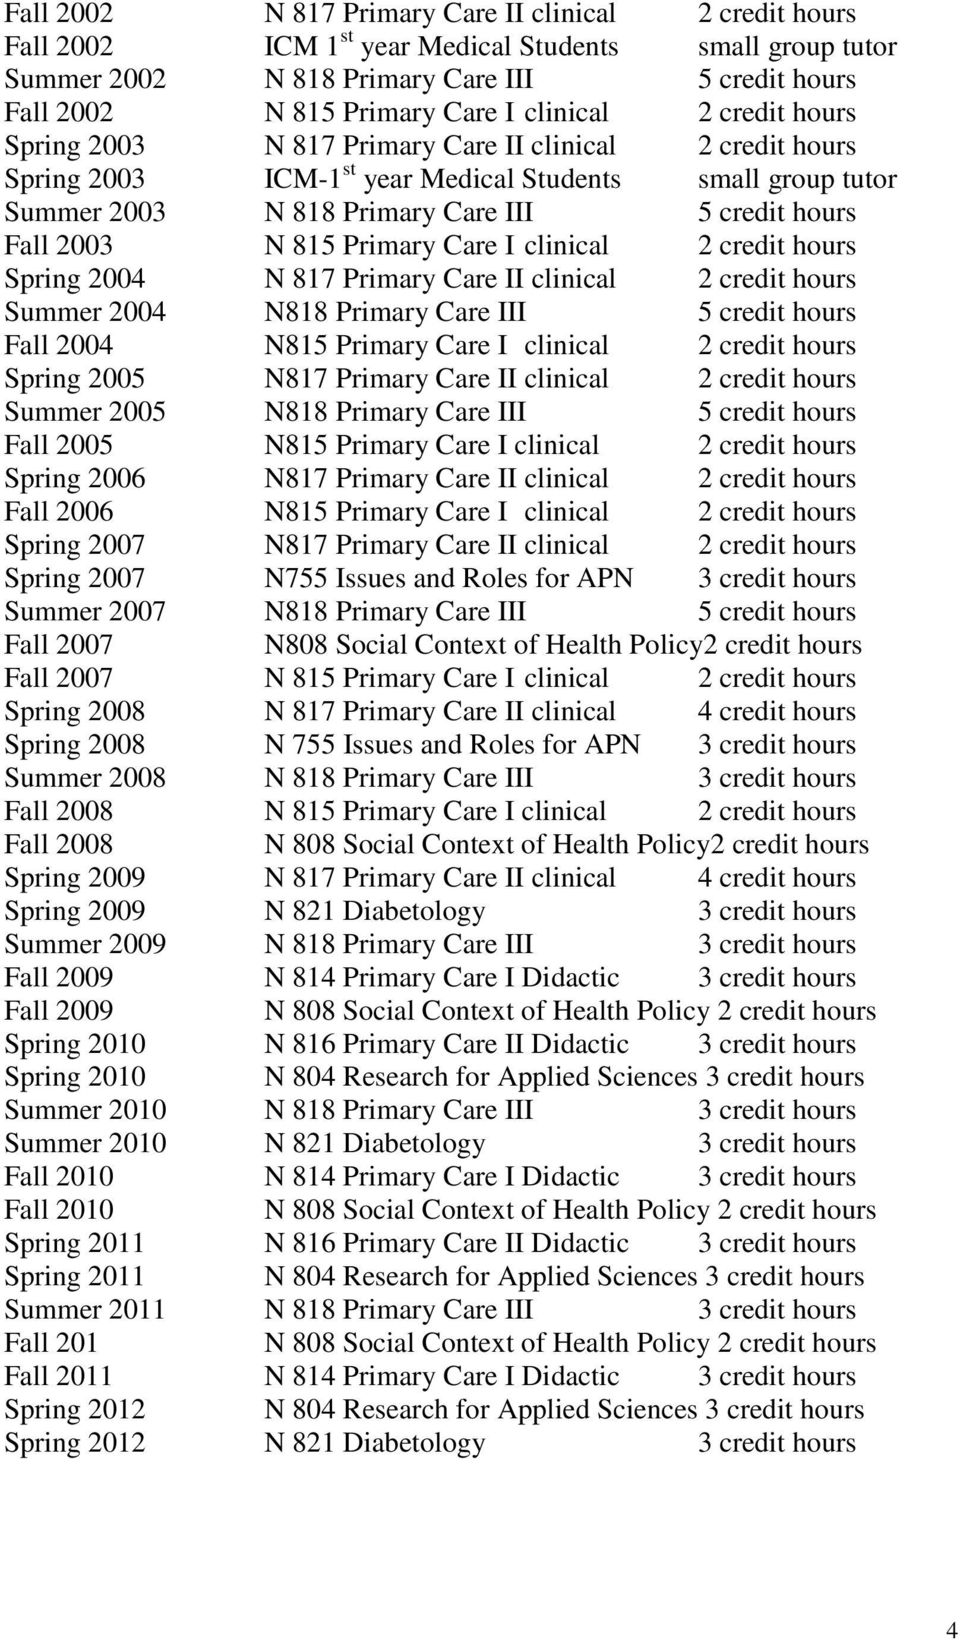 2003 N 815 Primary Care I clinical 2 credit hours Spring 2004 N 817 Primary Care II clinical 2 credit hours Summer 2004 N818 Primary Care III 5 credit hours Fall 2004 N815 Primary Care I clinical 2